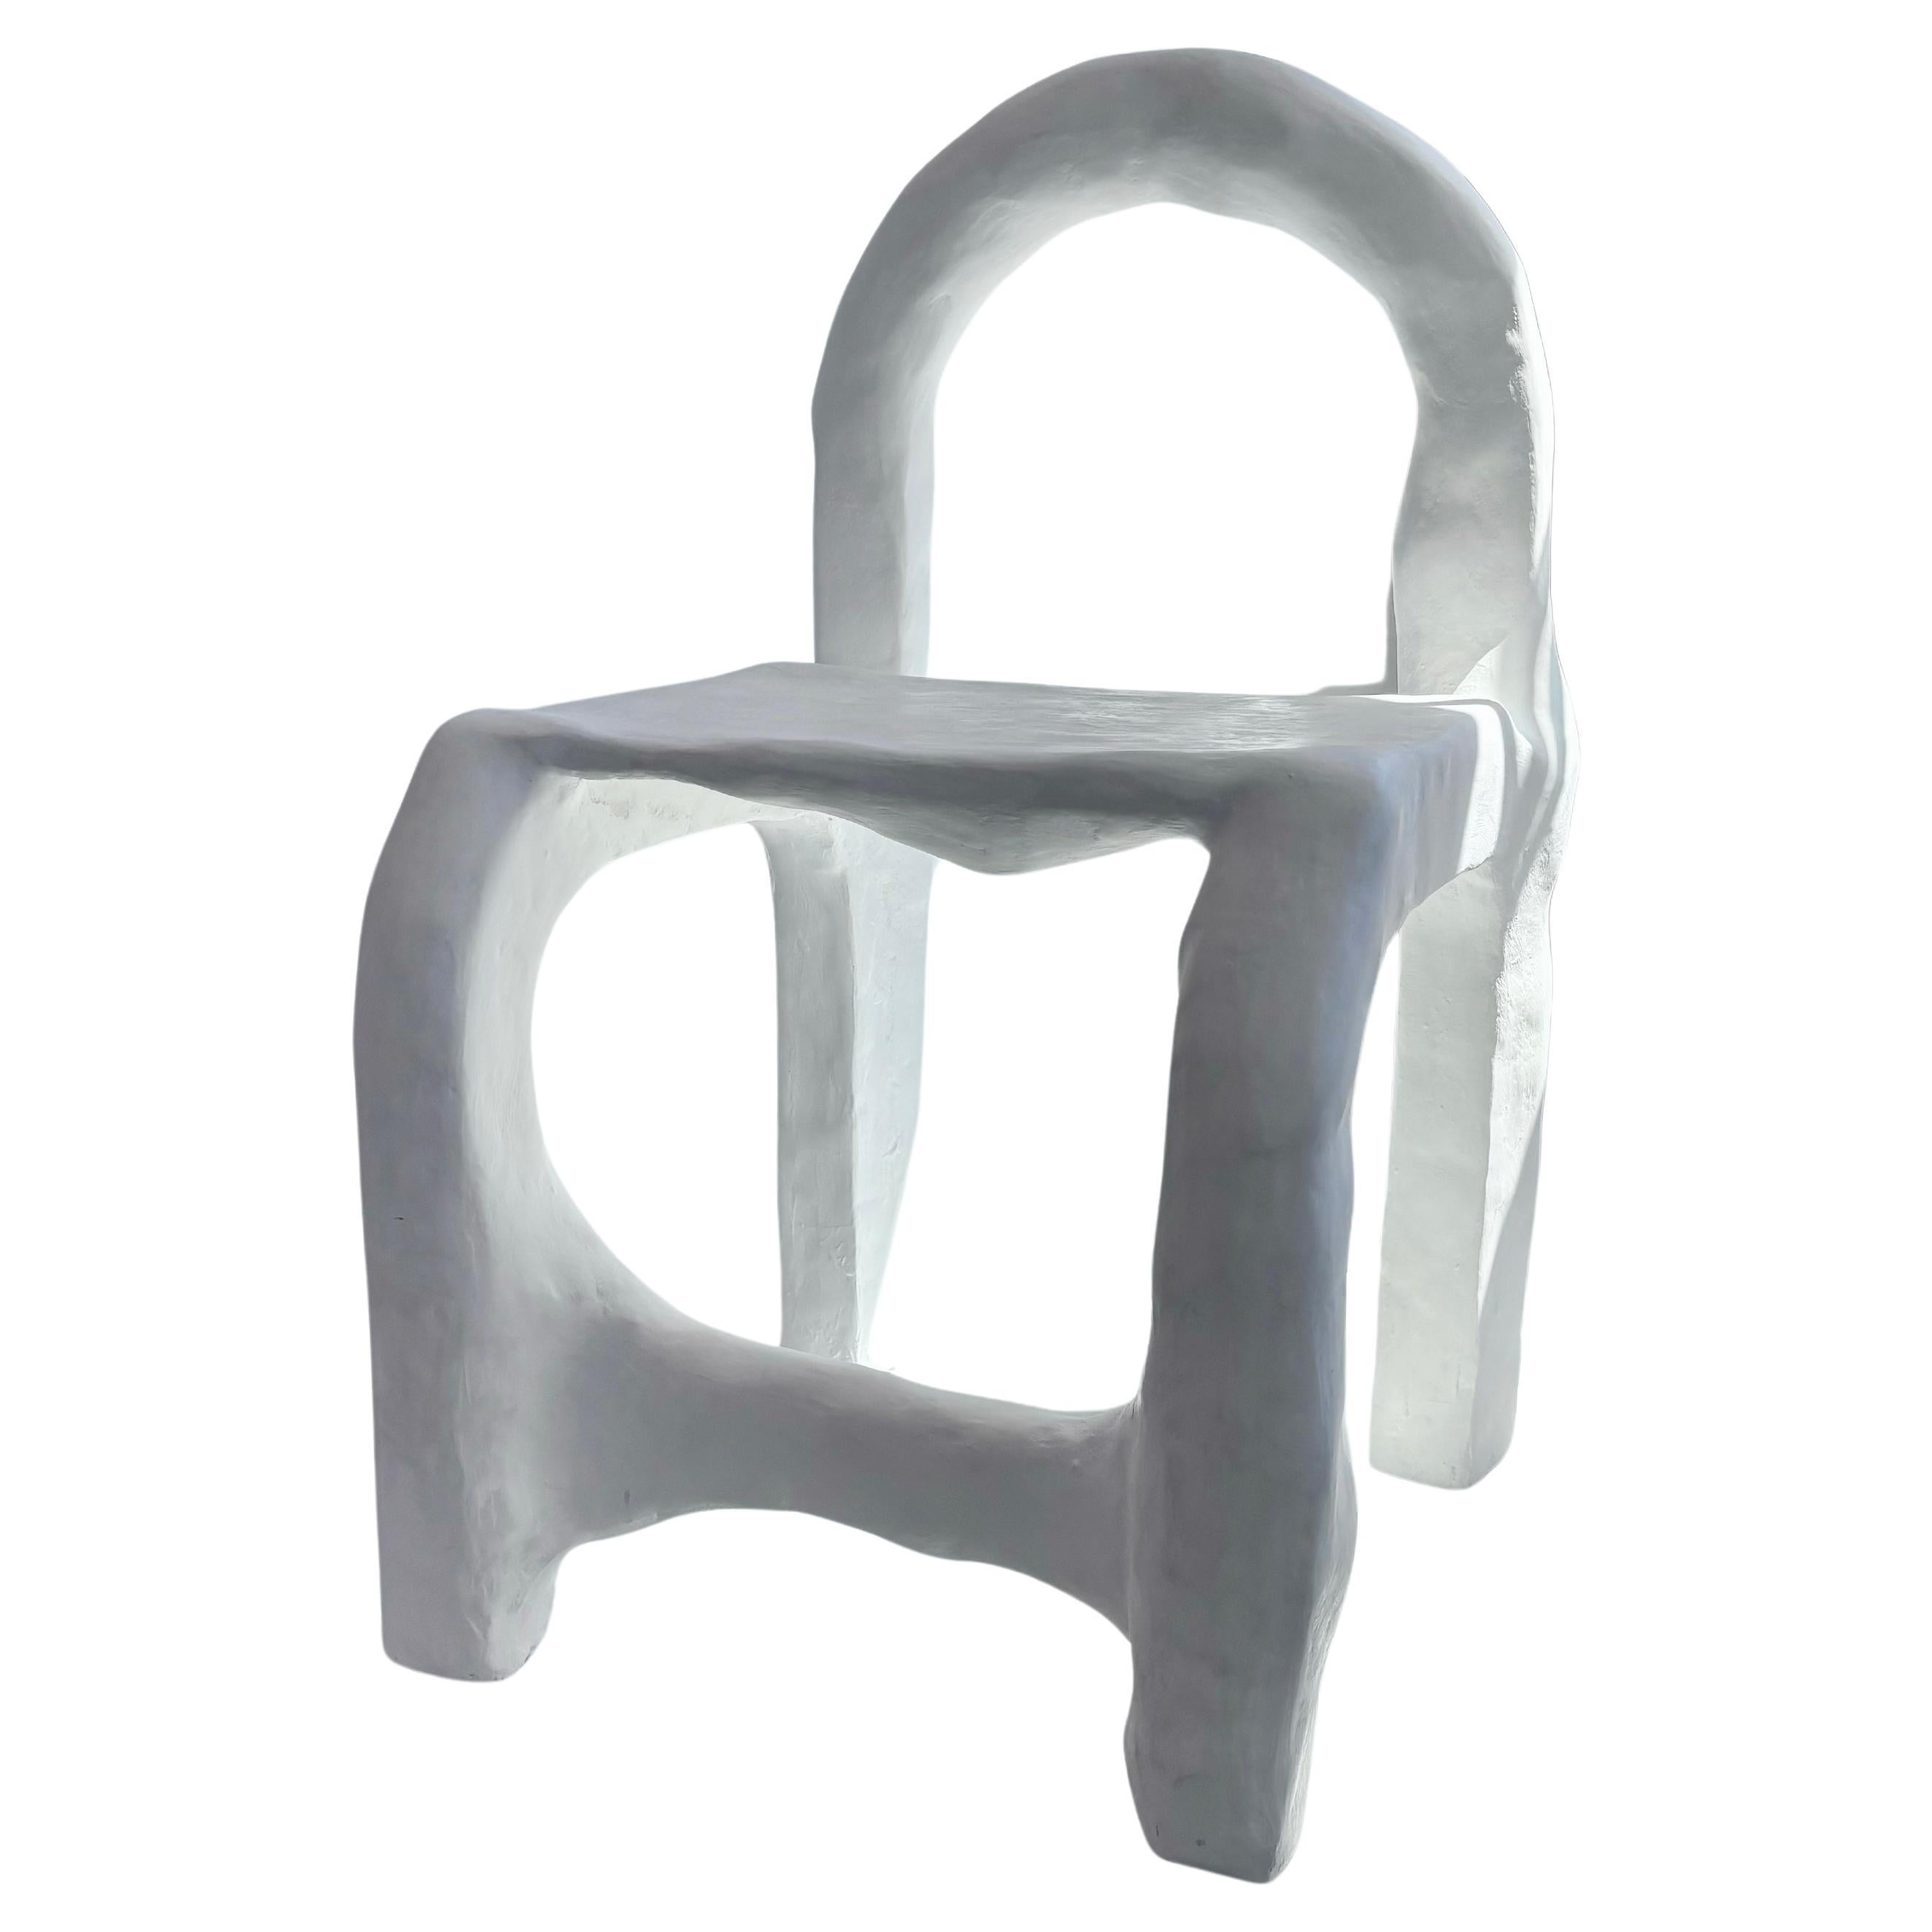 Organic Modern Biomorphic Line by Studio Chora, Functional Sculpture, White Plaster Chair For Sale